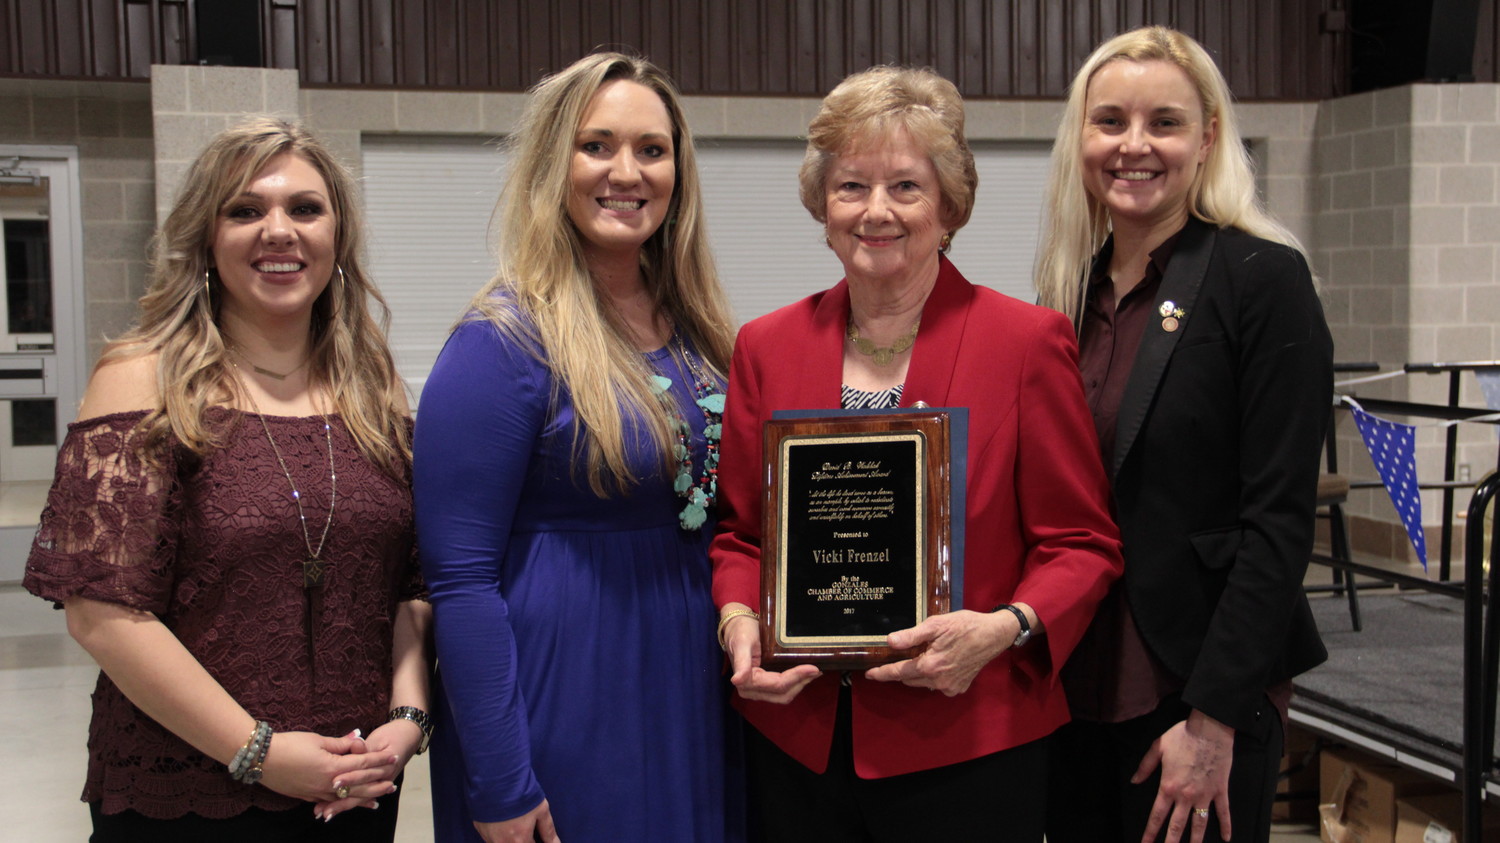 Vicki Frenzel was honored with the 2018 David B. Walshak Lifetime Achievement during the Gonzales Chamber of Commerce’s annual chamber banquet.